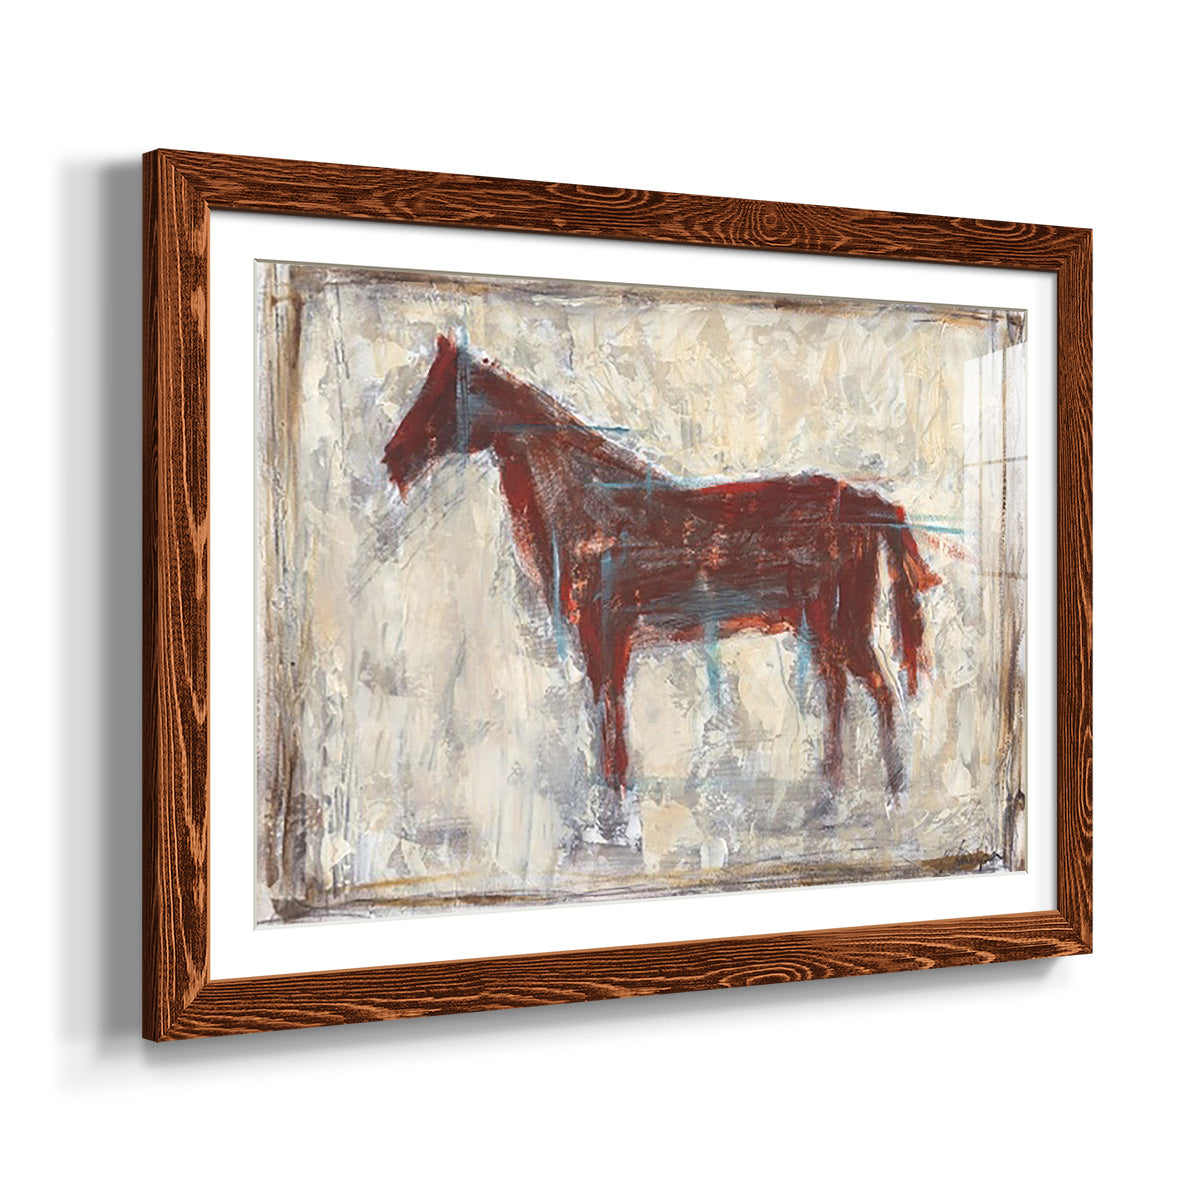 Iron Equine I-Premium Framed Print - Ready to Hang